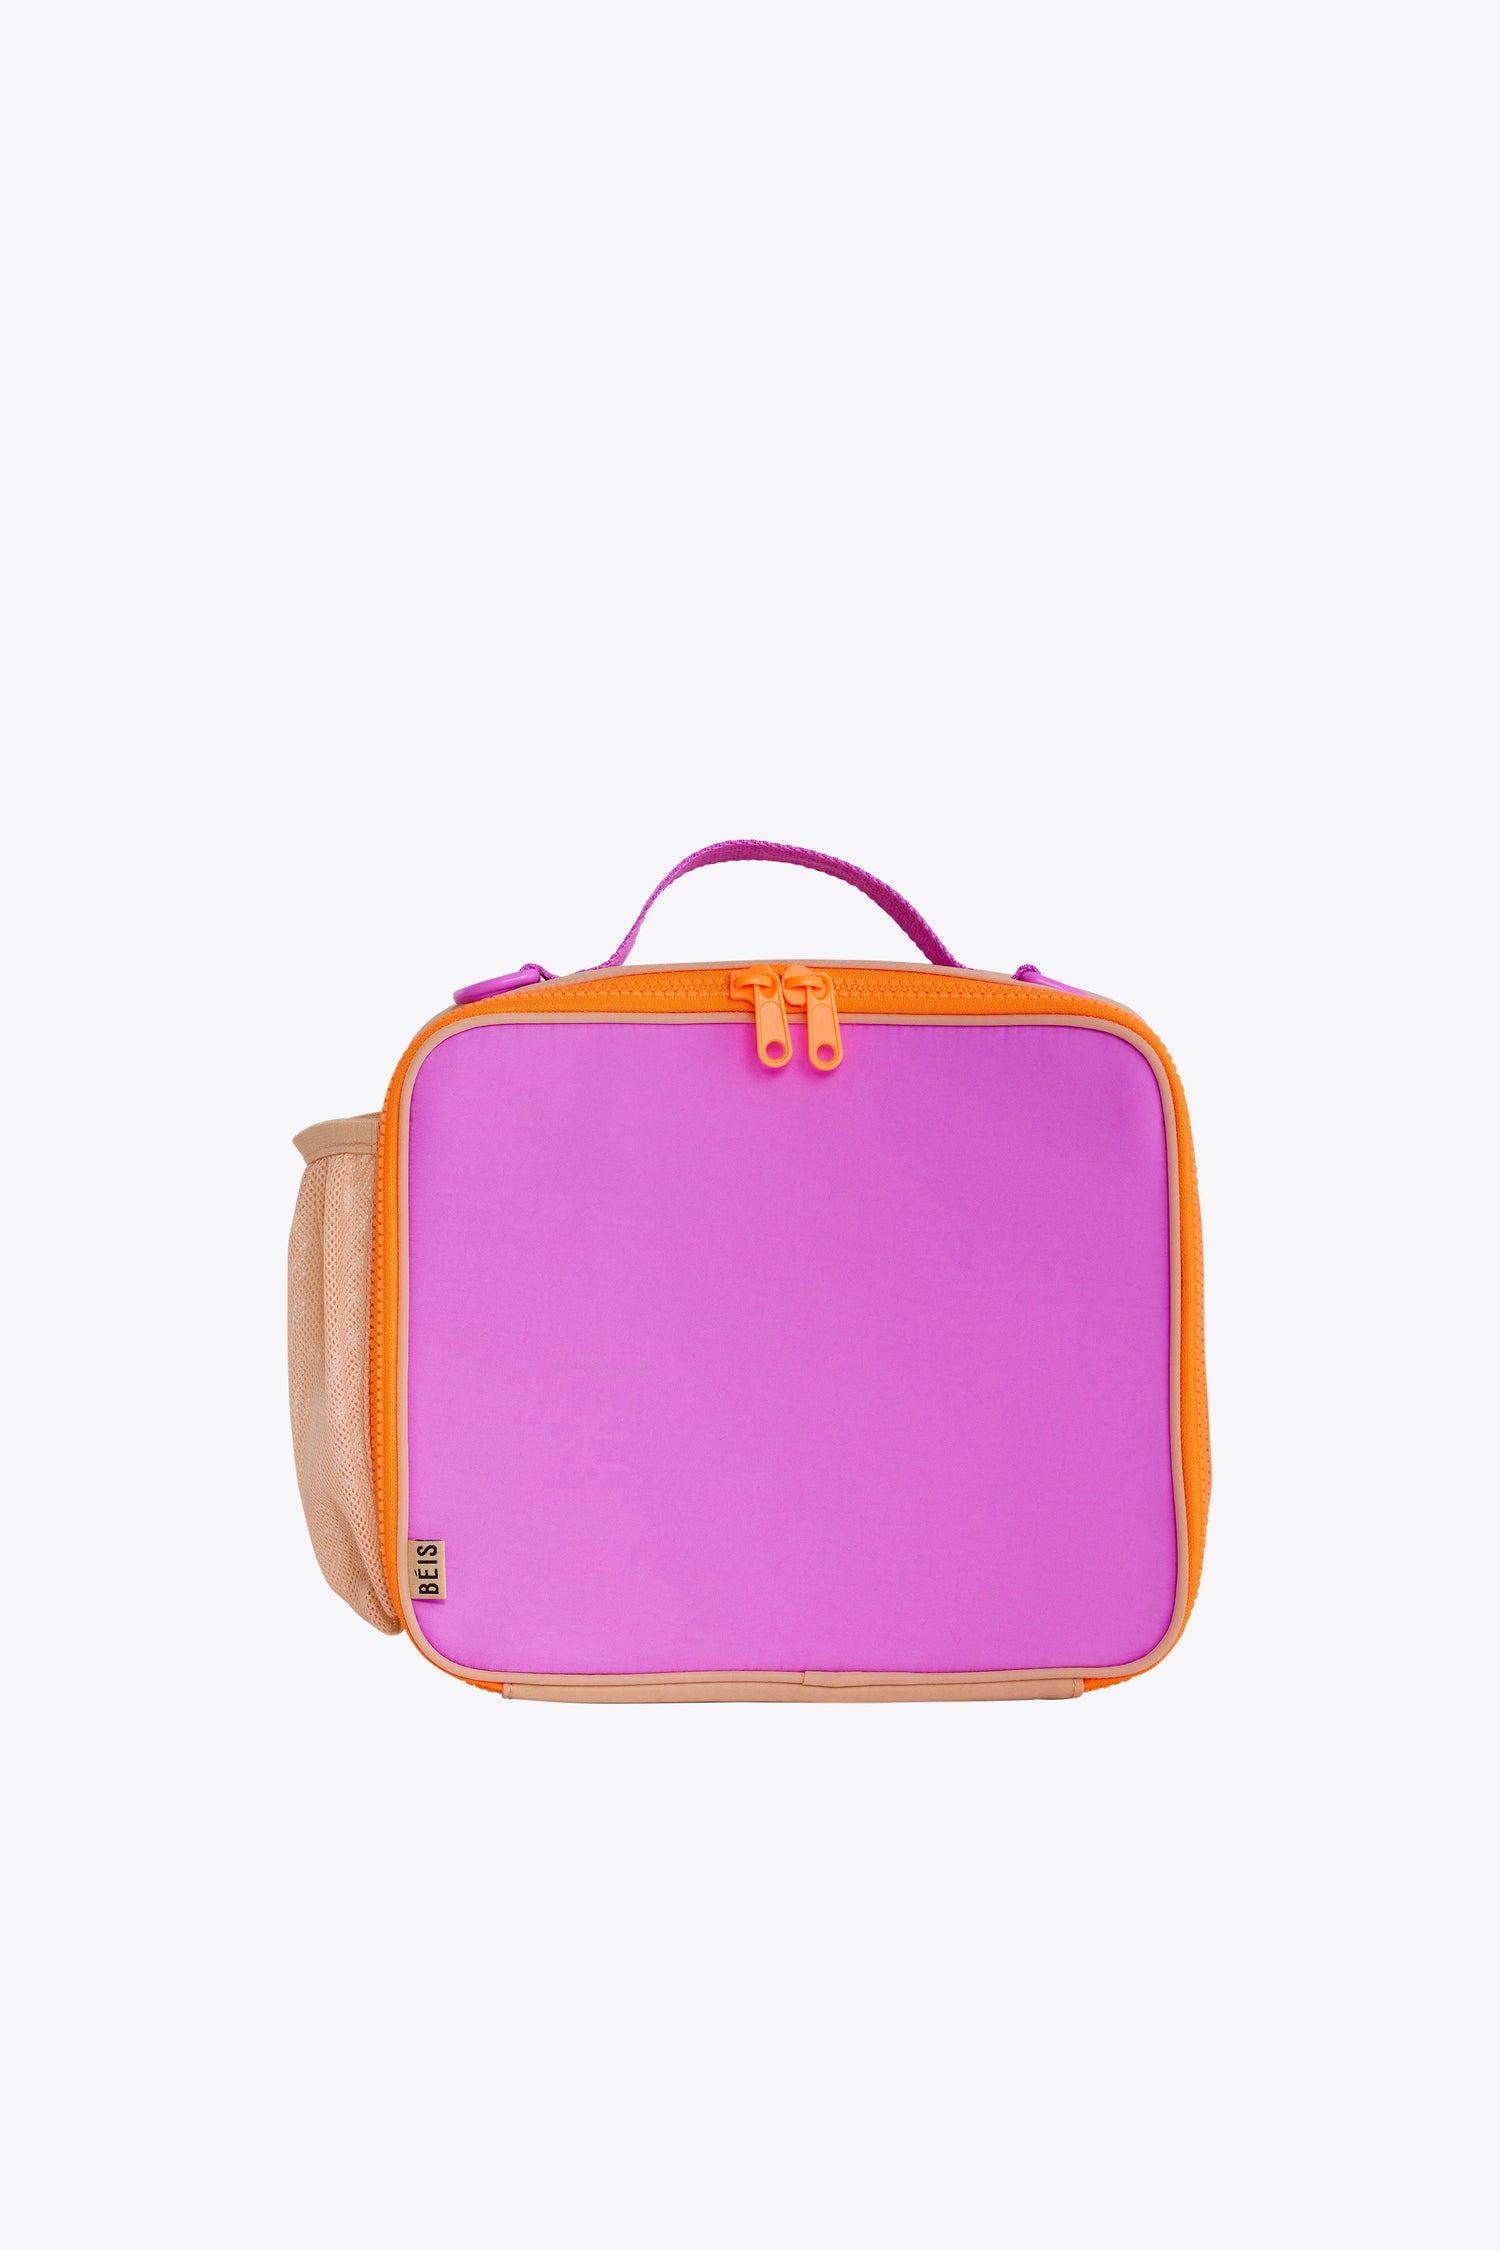 The Kids Lunch Box Colors